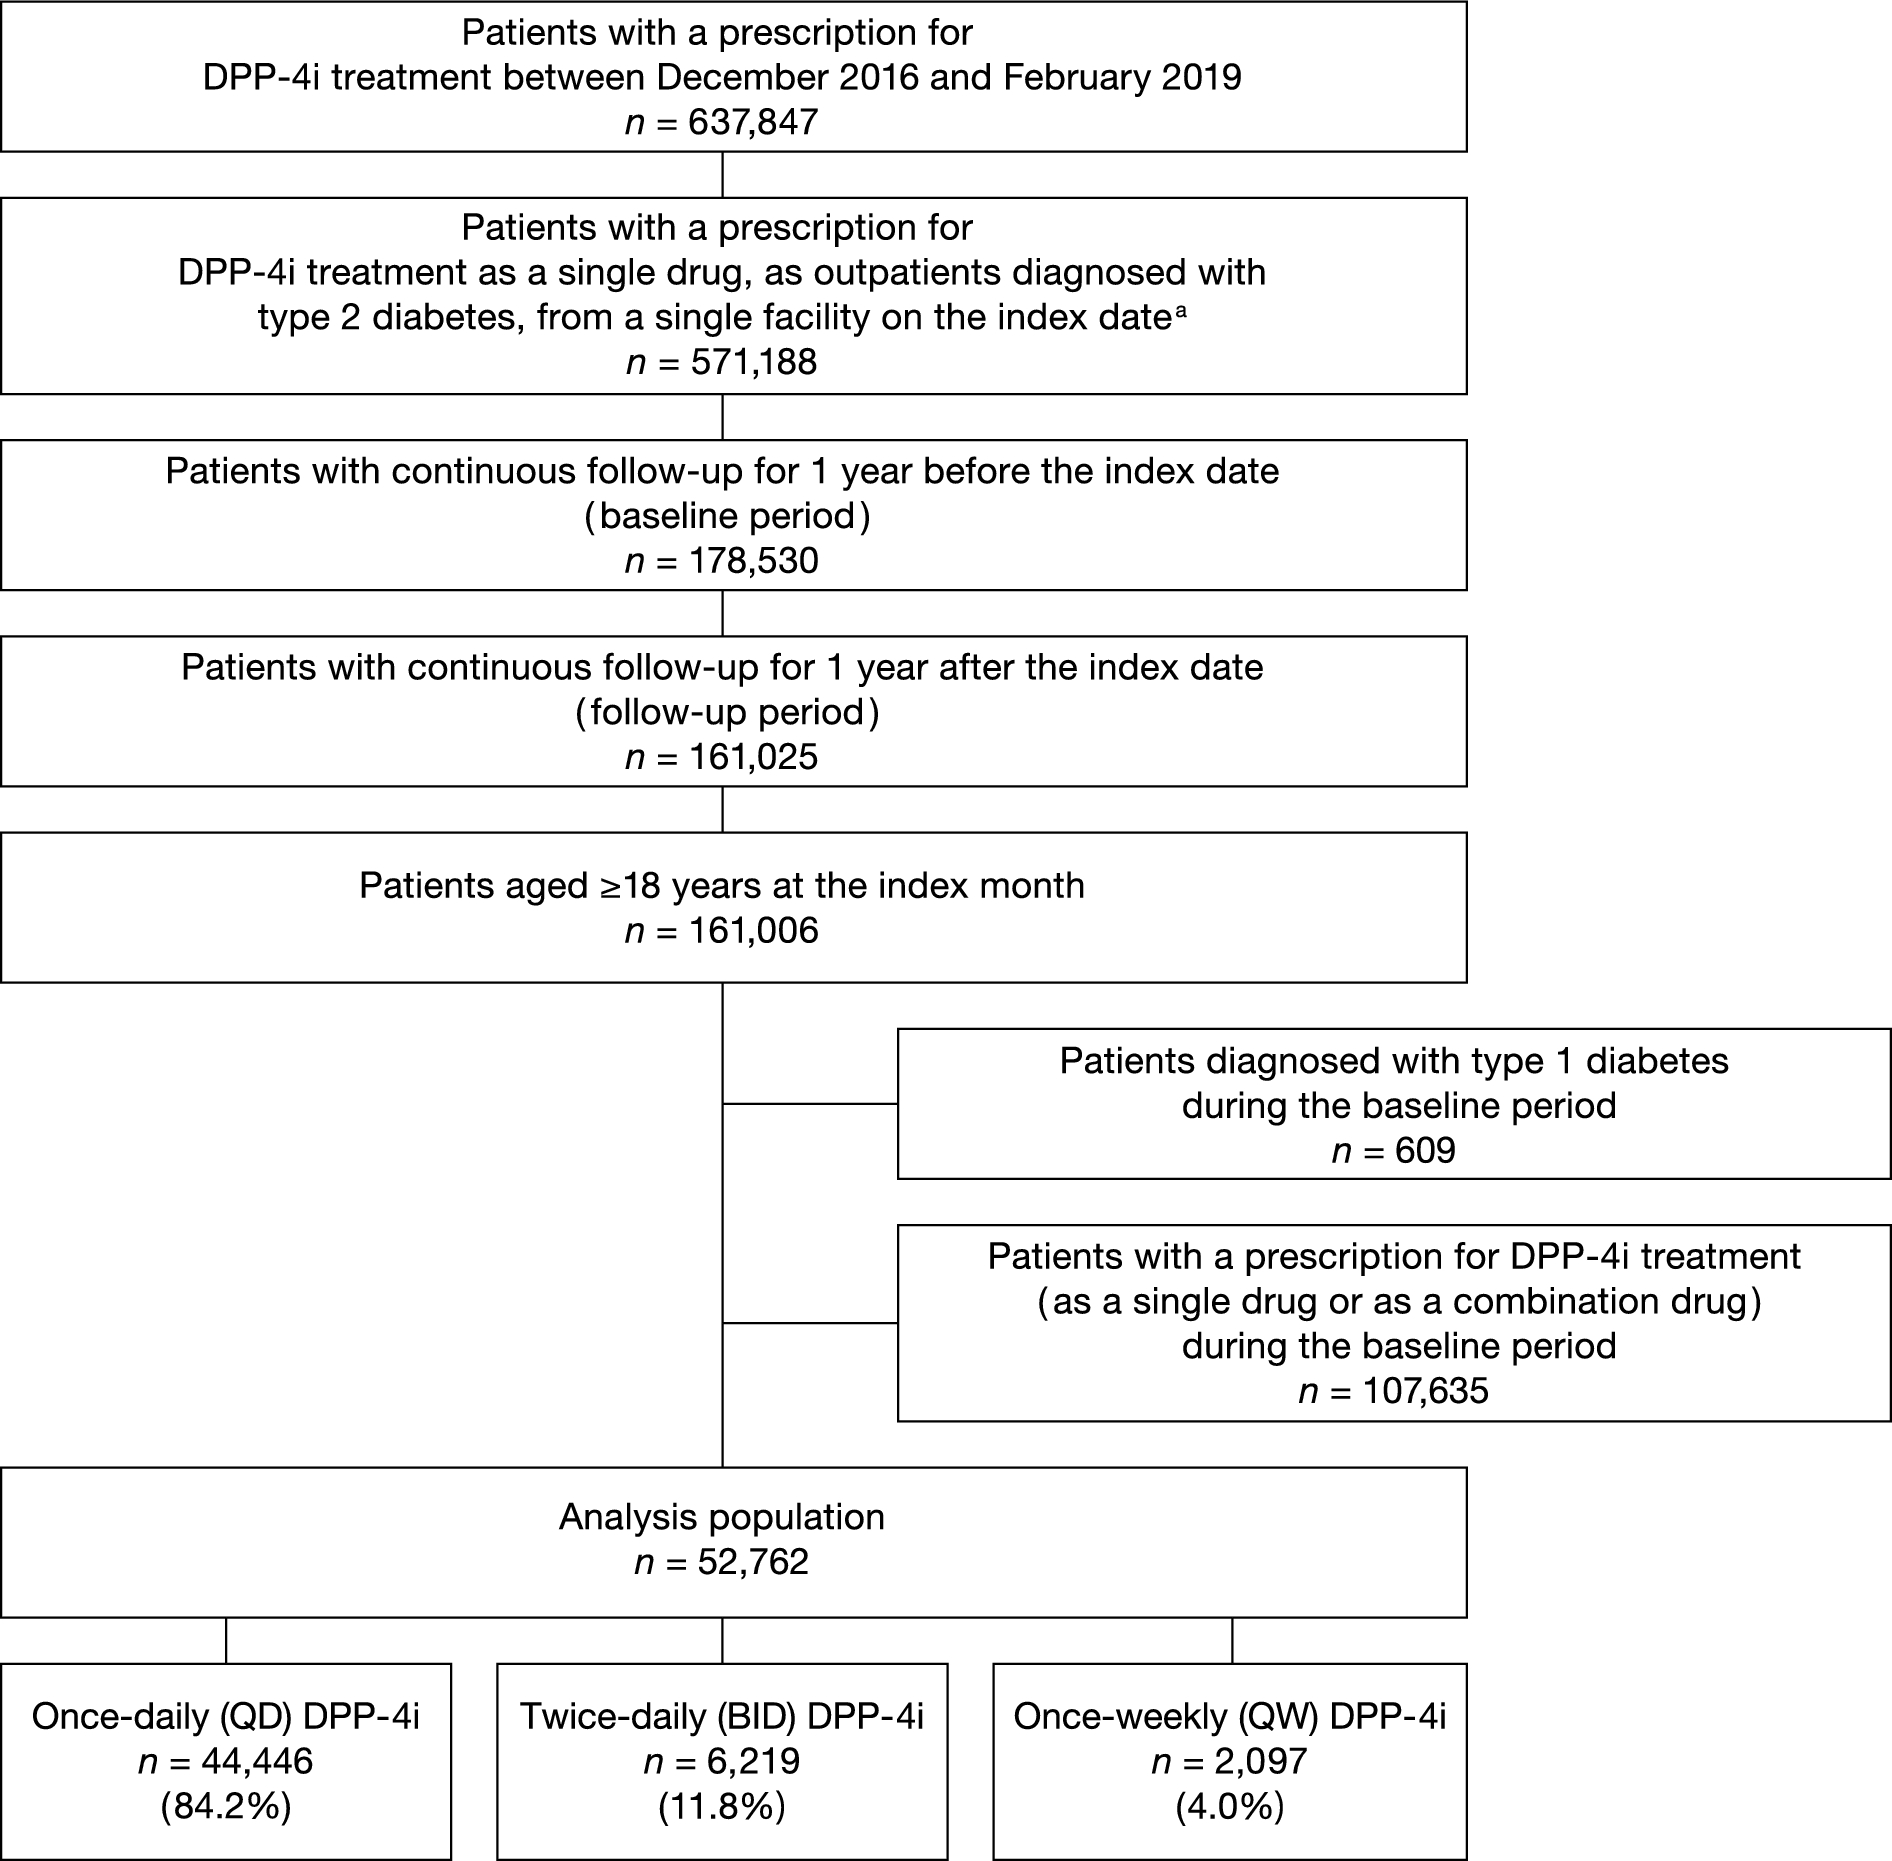 Comparison of medication persistence and adherence in type 2 diabetes using a once-weekly regimen of DPP-4 inhibitor compared with once-daily and twice-daily regimens: a retrospective cohort study of Japanese health insurance claims data